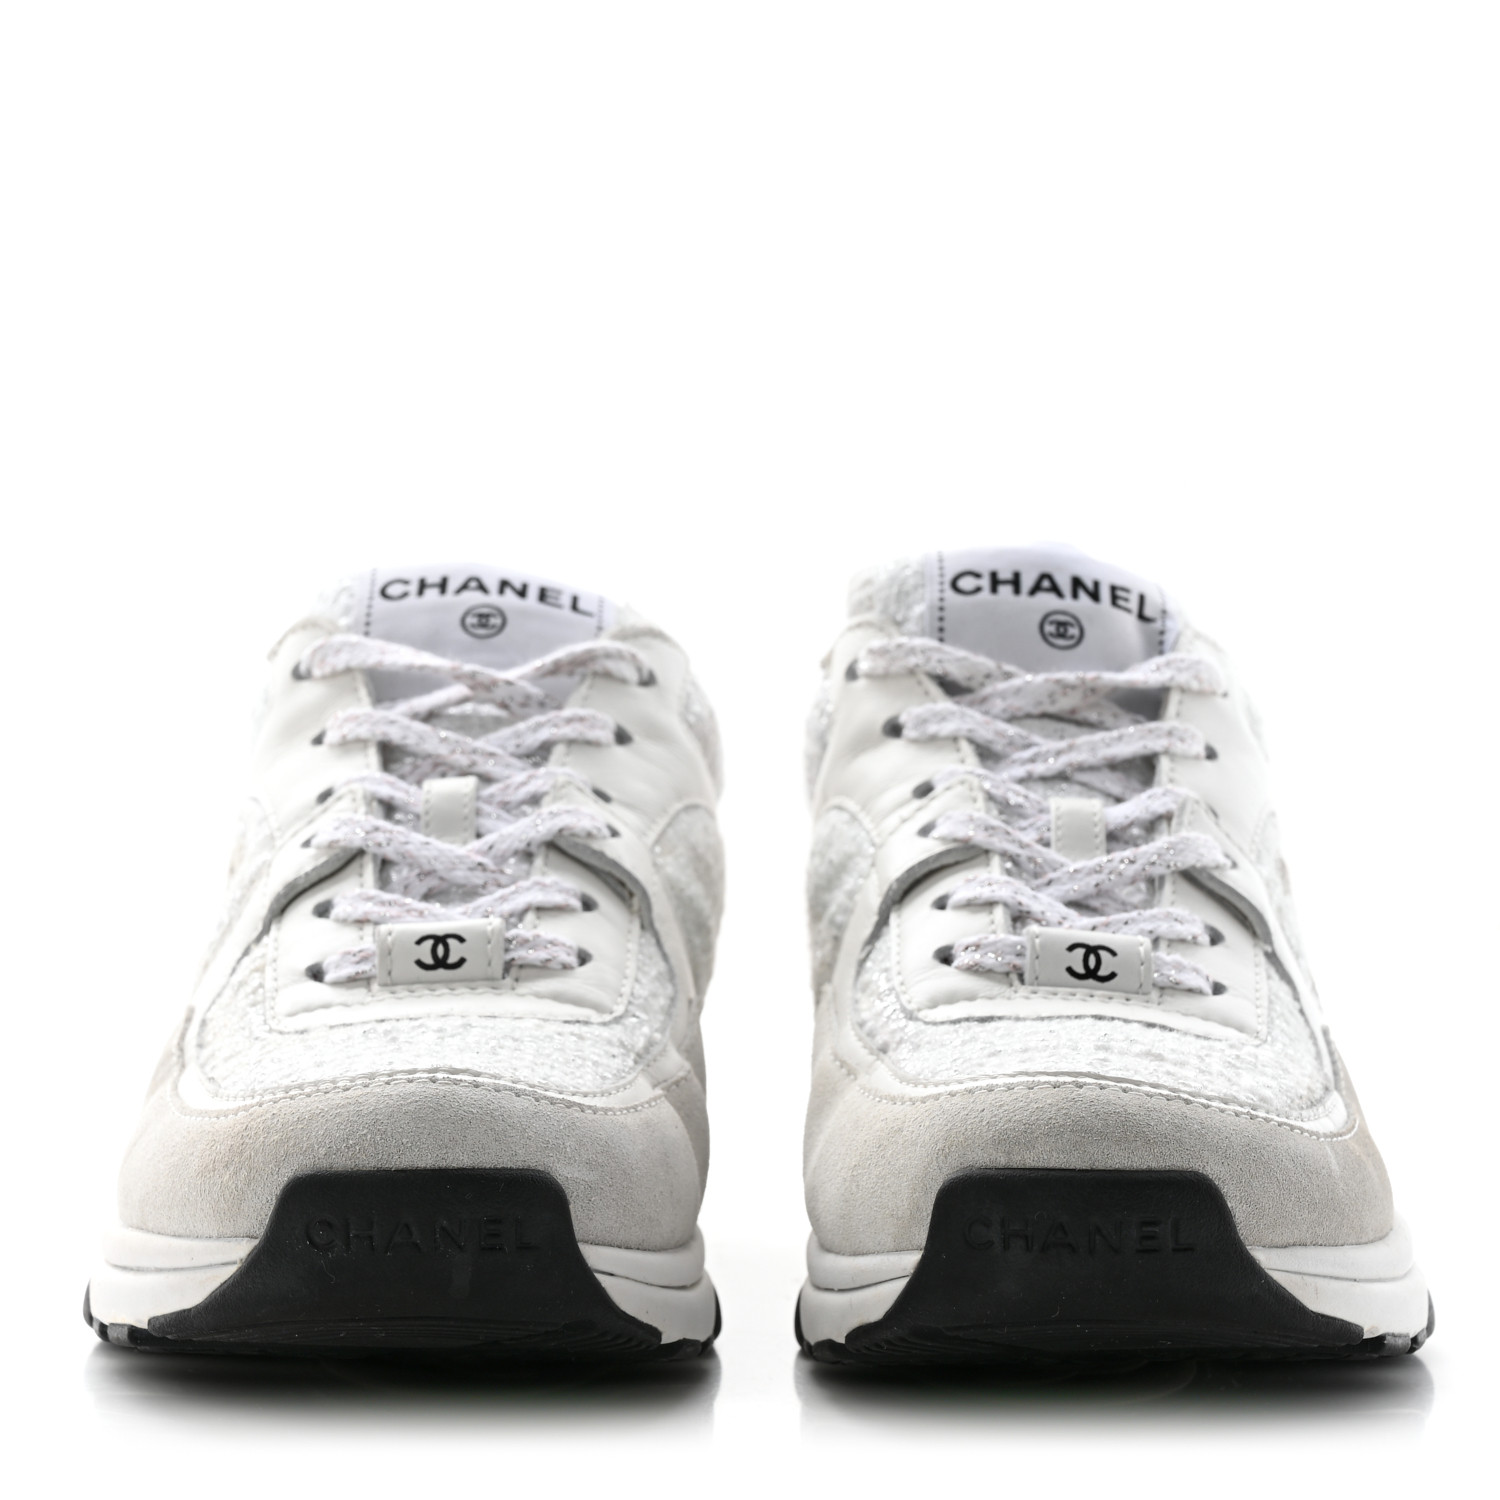 CHANEL Painted Iridescent Cotton Tweed Suede Calfskin Womens CC Sneakers 37 White Silver Multicolor